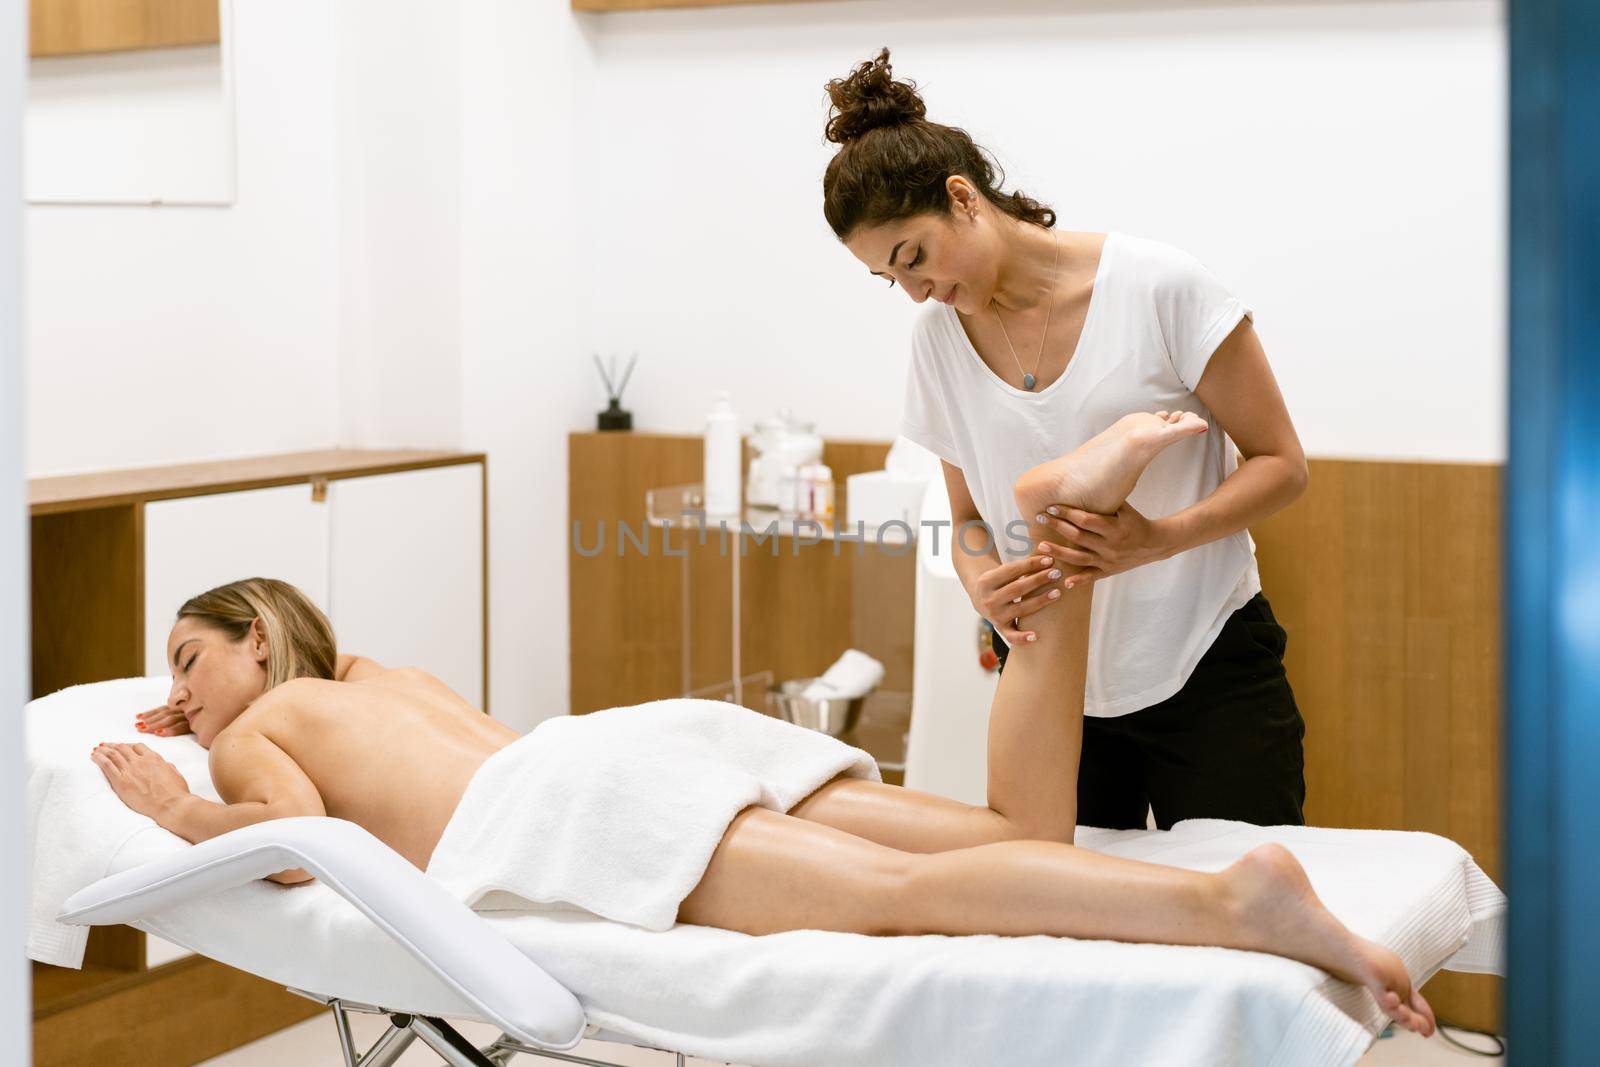 Middle-aged woman having a leg massage in a beauty salon. Body care treatment in a beauty centre.